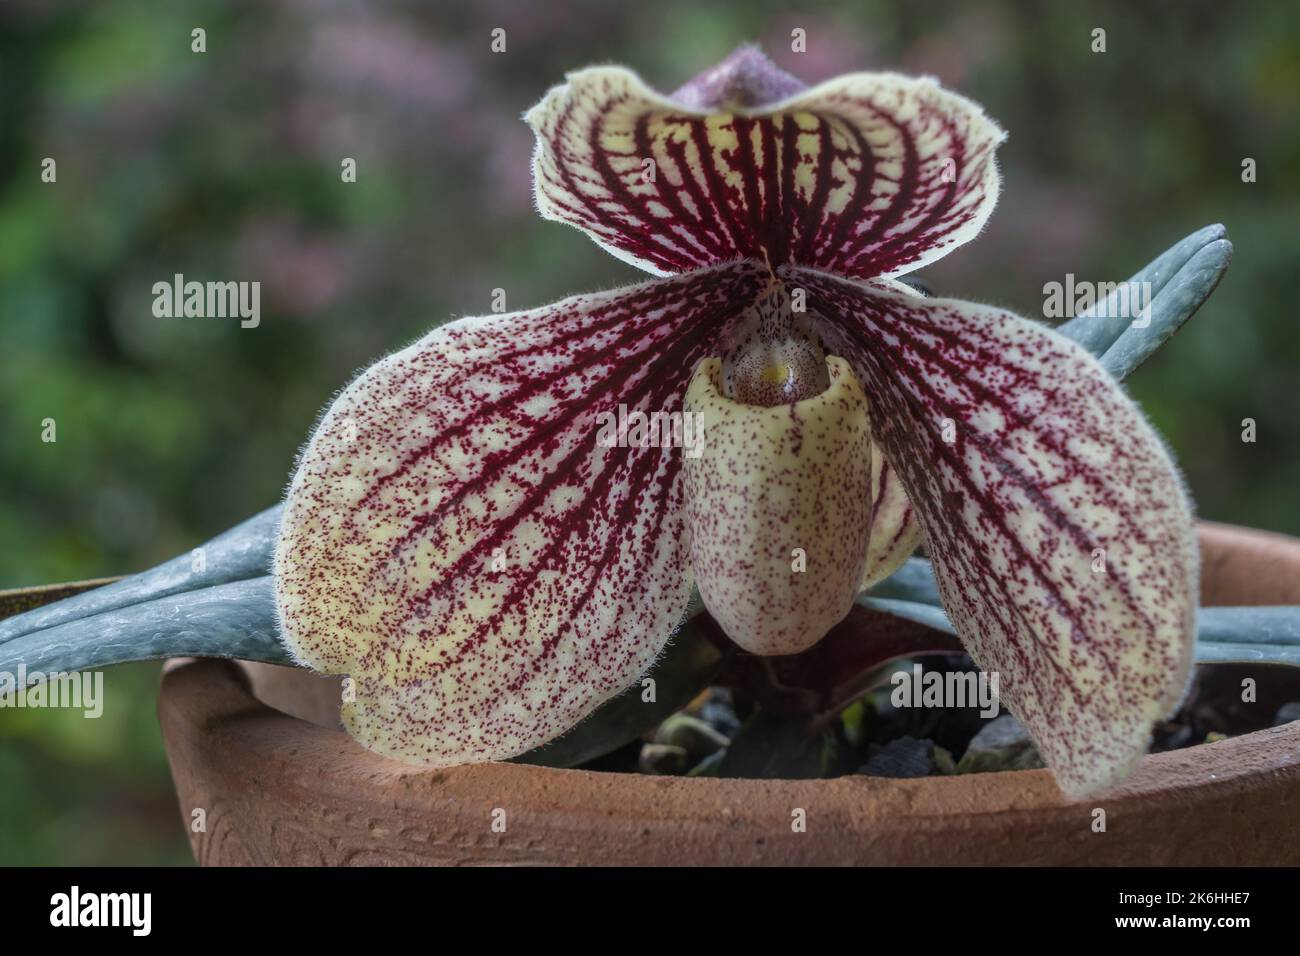 Closeup view of purple red and creamy white flower of lady slipper orchid species paphiopedilum myanmaricum isolated outdoors on natural background Stock Photo